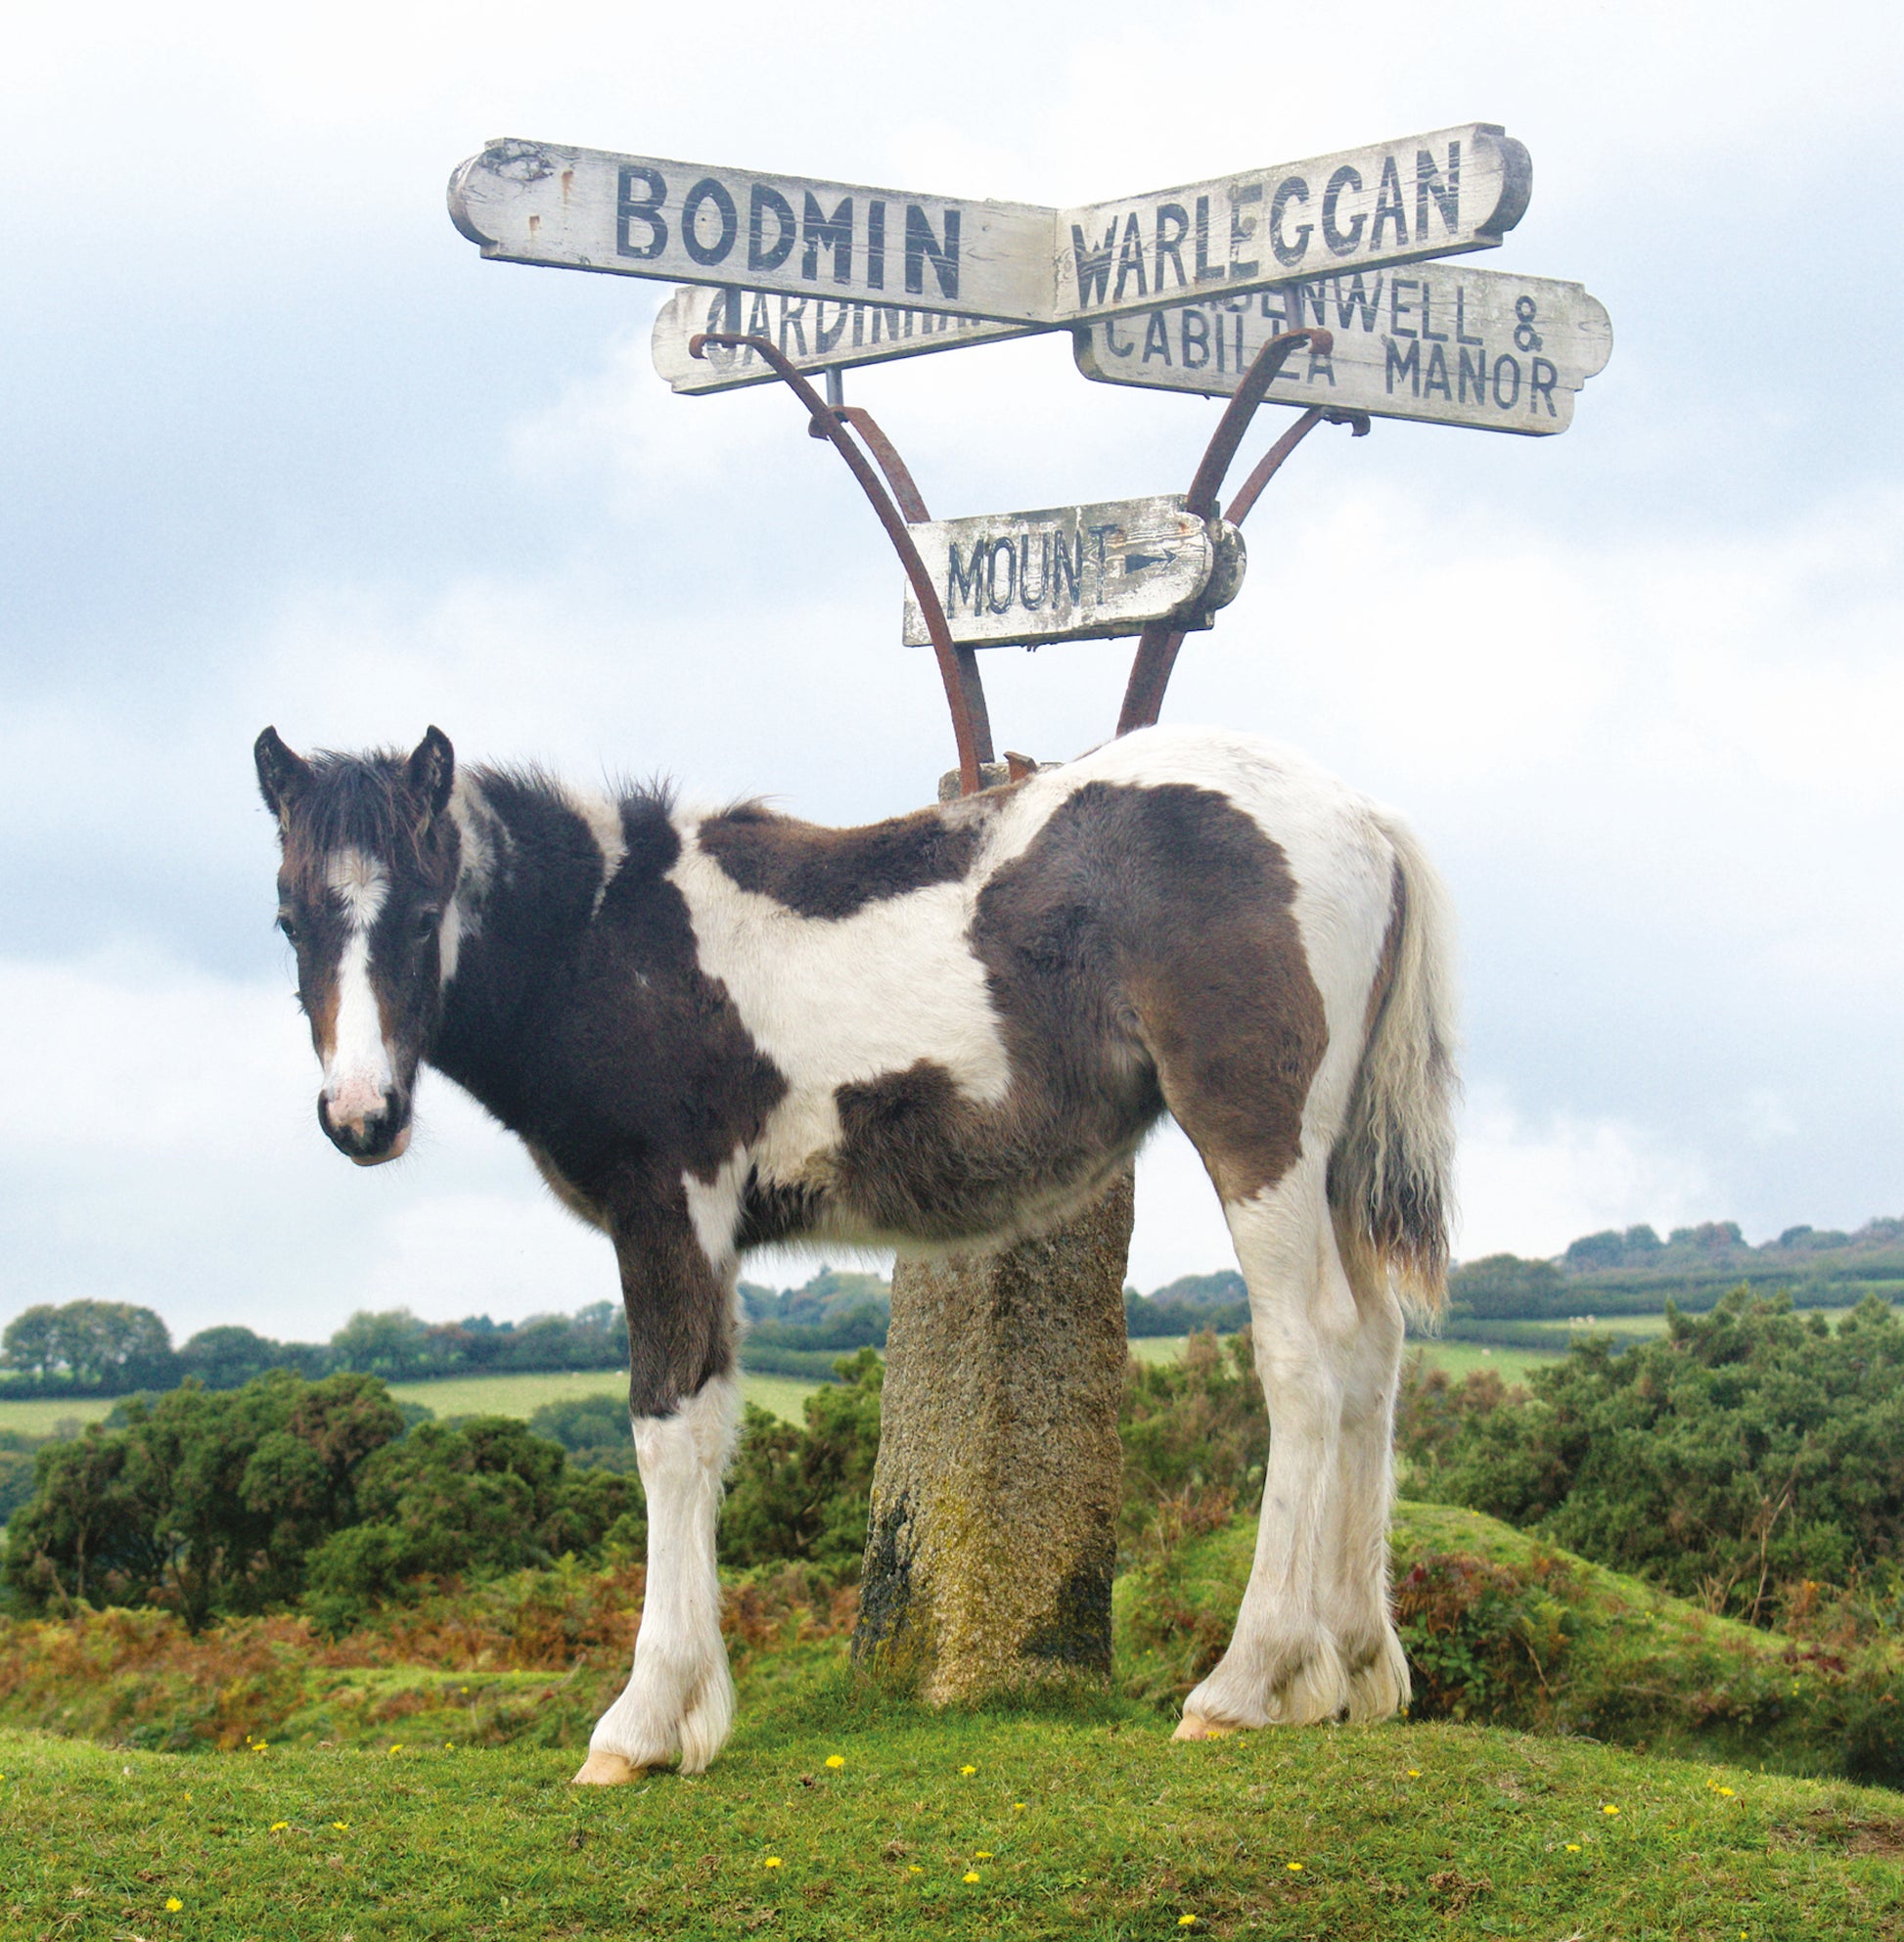 Cornish Language Good Luck card, pony in front of signpost on Bodmin Moor